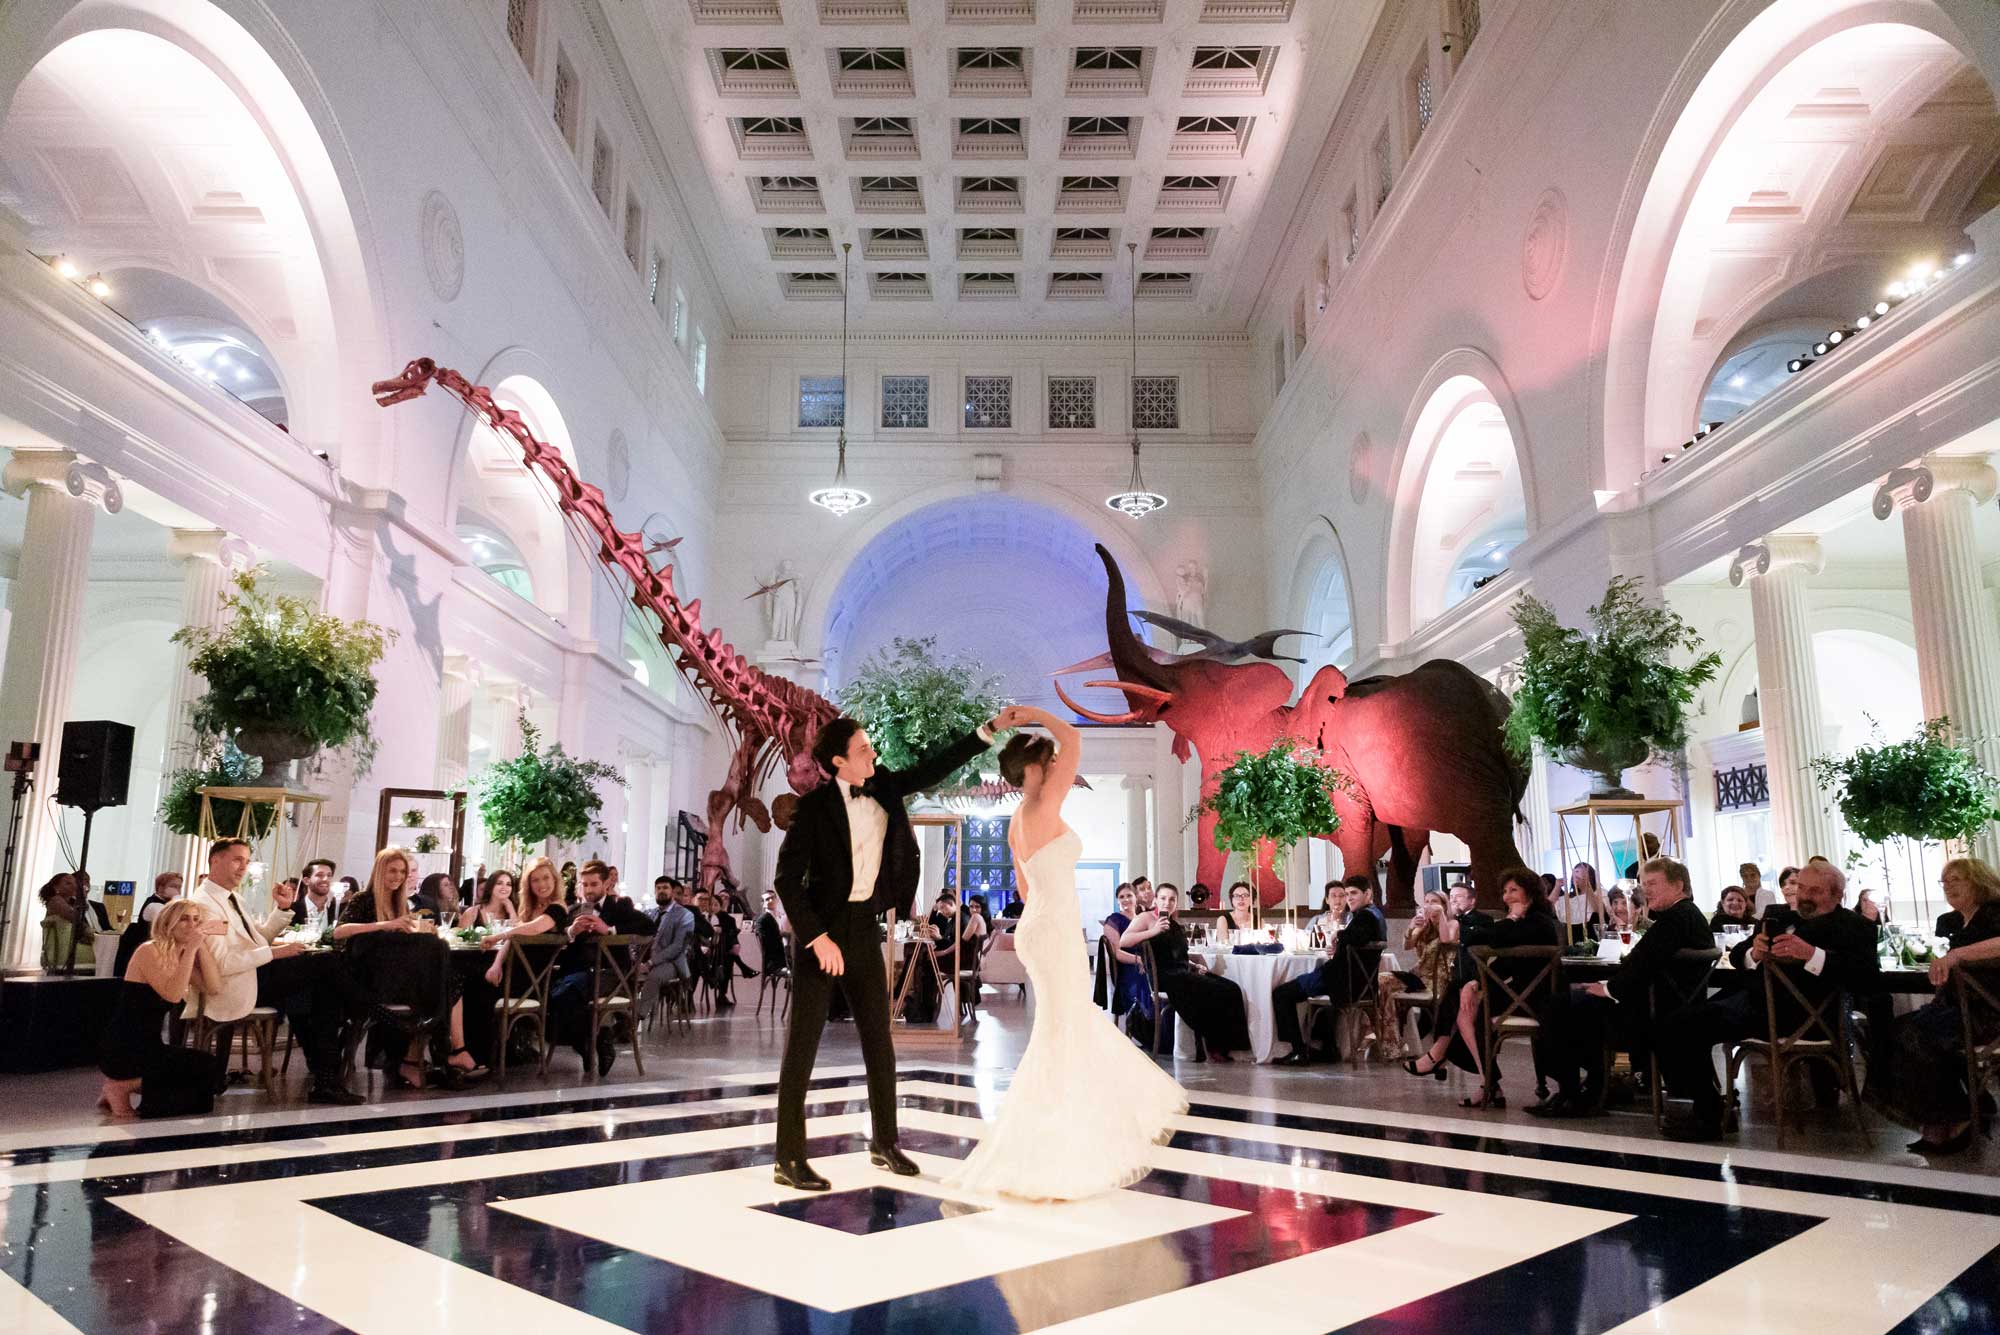 A couple shares their first dance in the center of Stanley Field Hall on a black and white dance floor. Wedding guests watch from their seats and elephants and Máximo the Titanosaur are visible in the background.